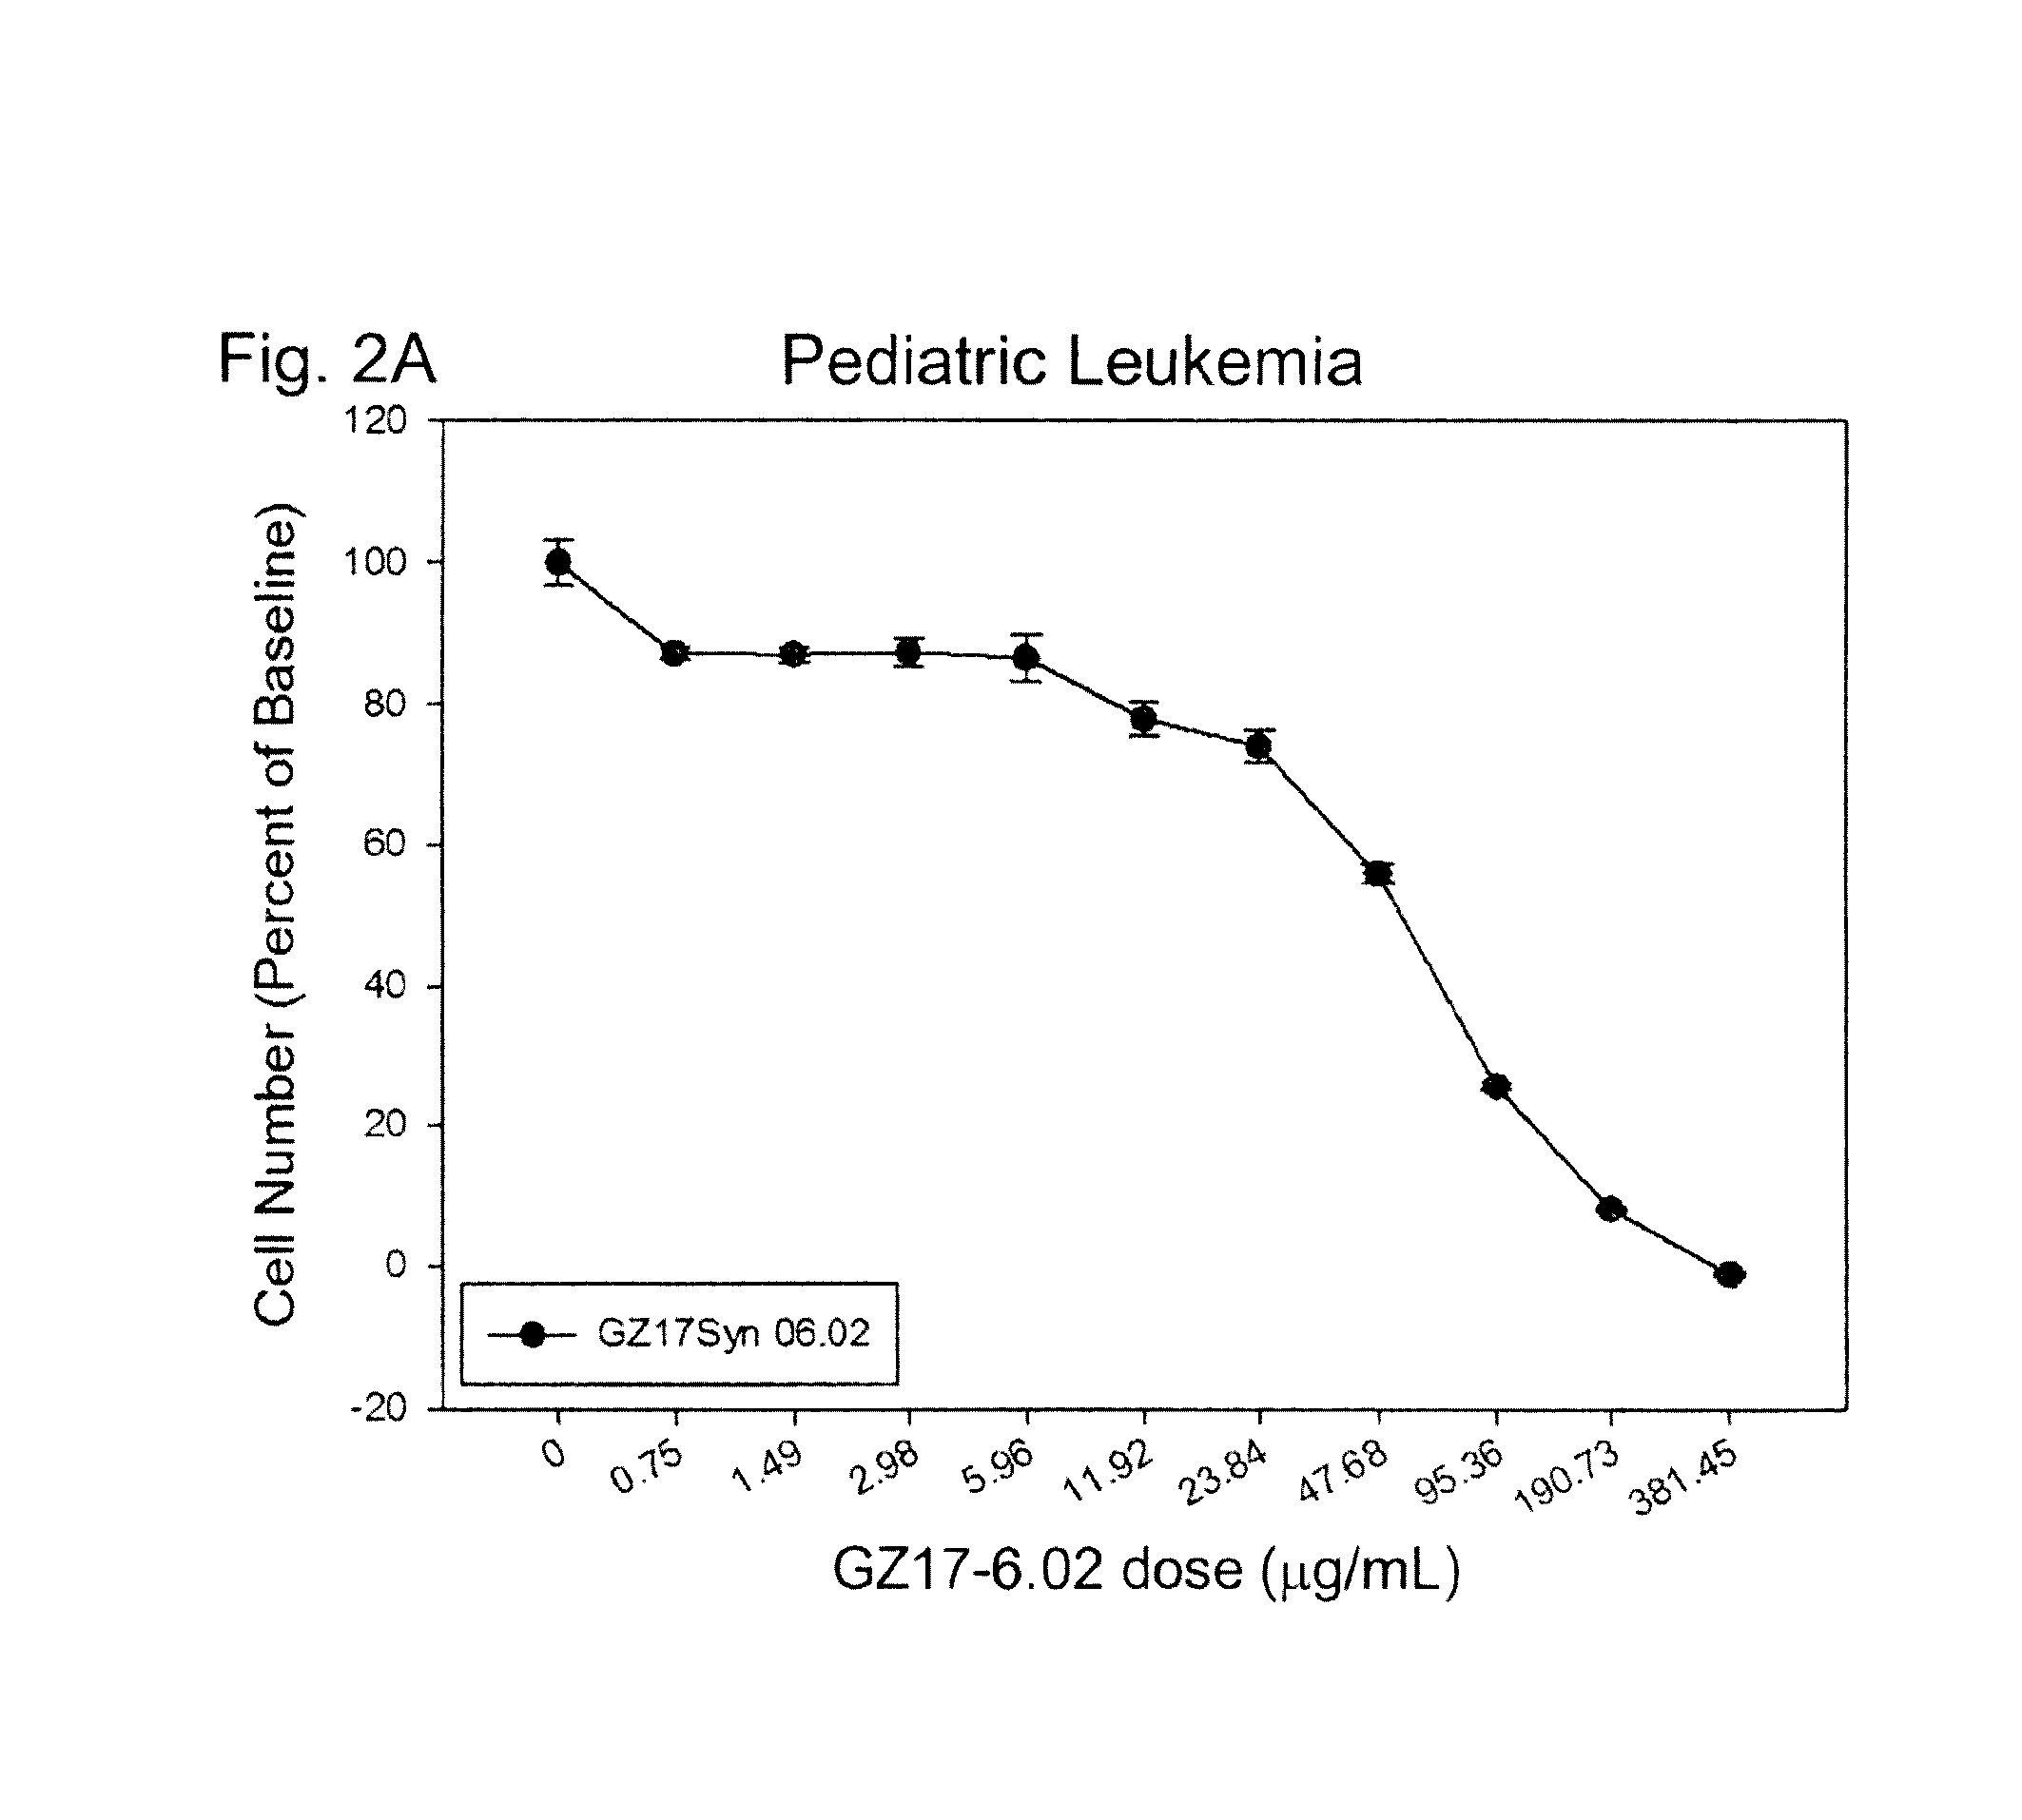 Therapeutic compositions containing curcumin, harmine, and isovanillin components, and methods of use thereof